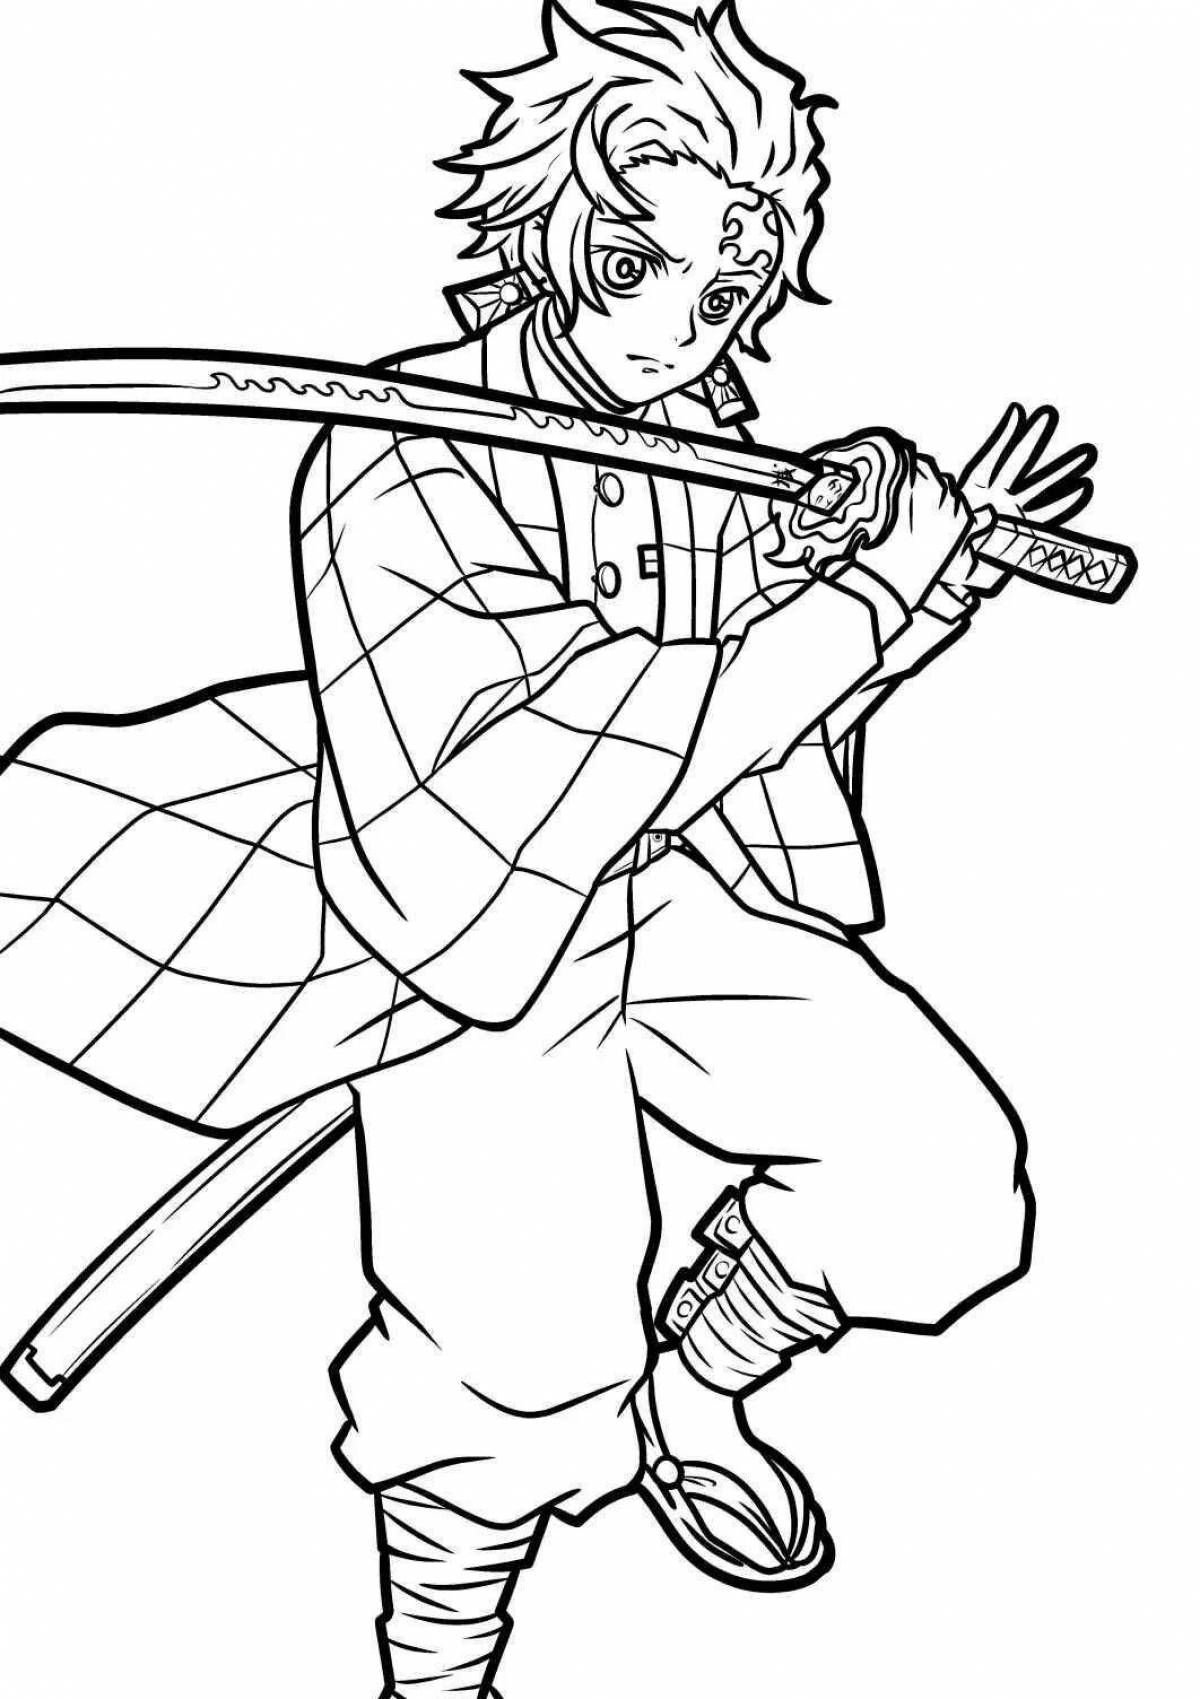 Cleaver's fascinating jib coloring page